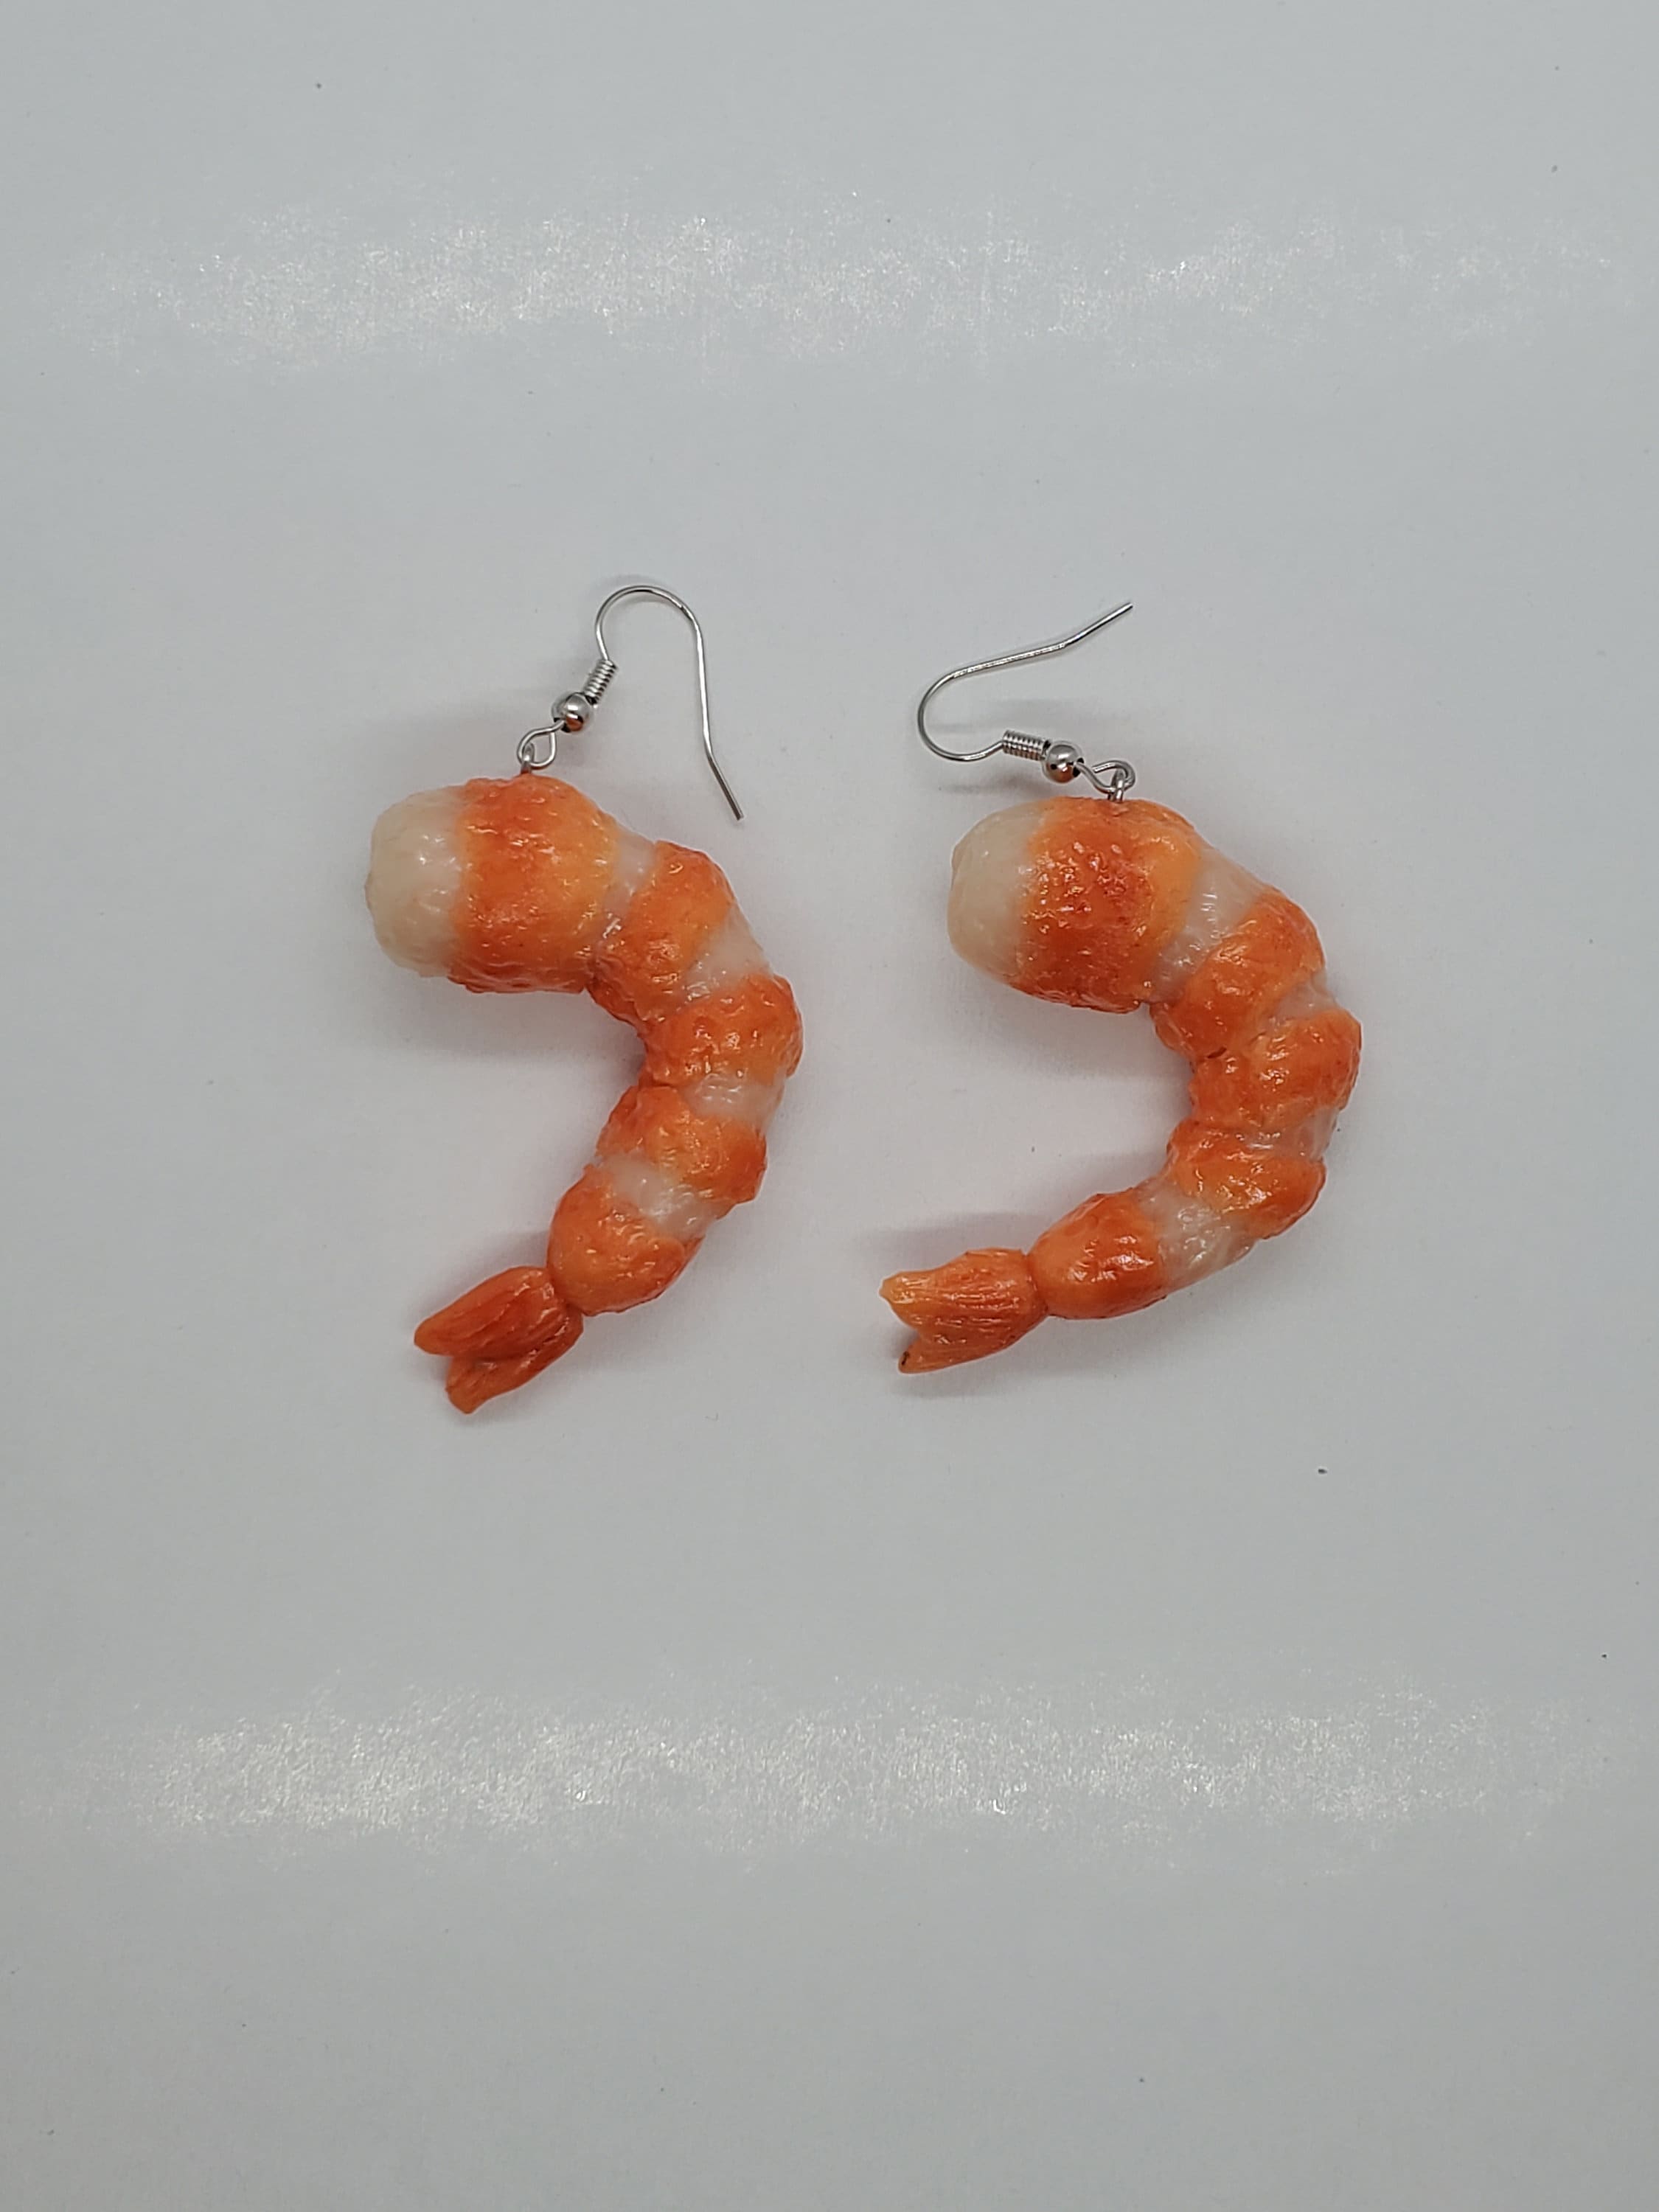 Shrimp Earrings, Seafood Fish Jewelry, Raw Sushi Miniatures, Gifts For Her, Clay Food